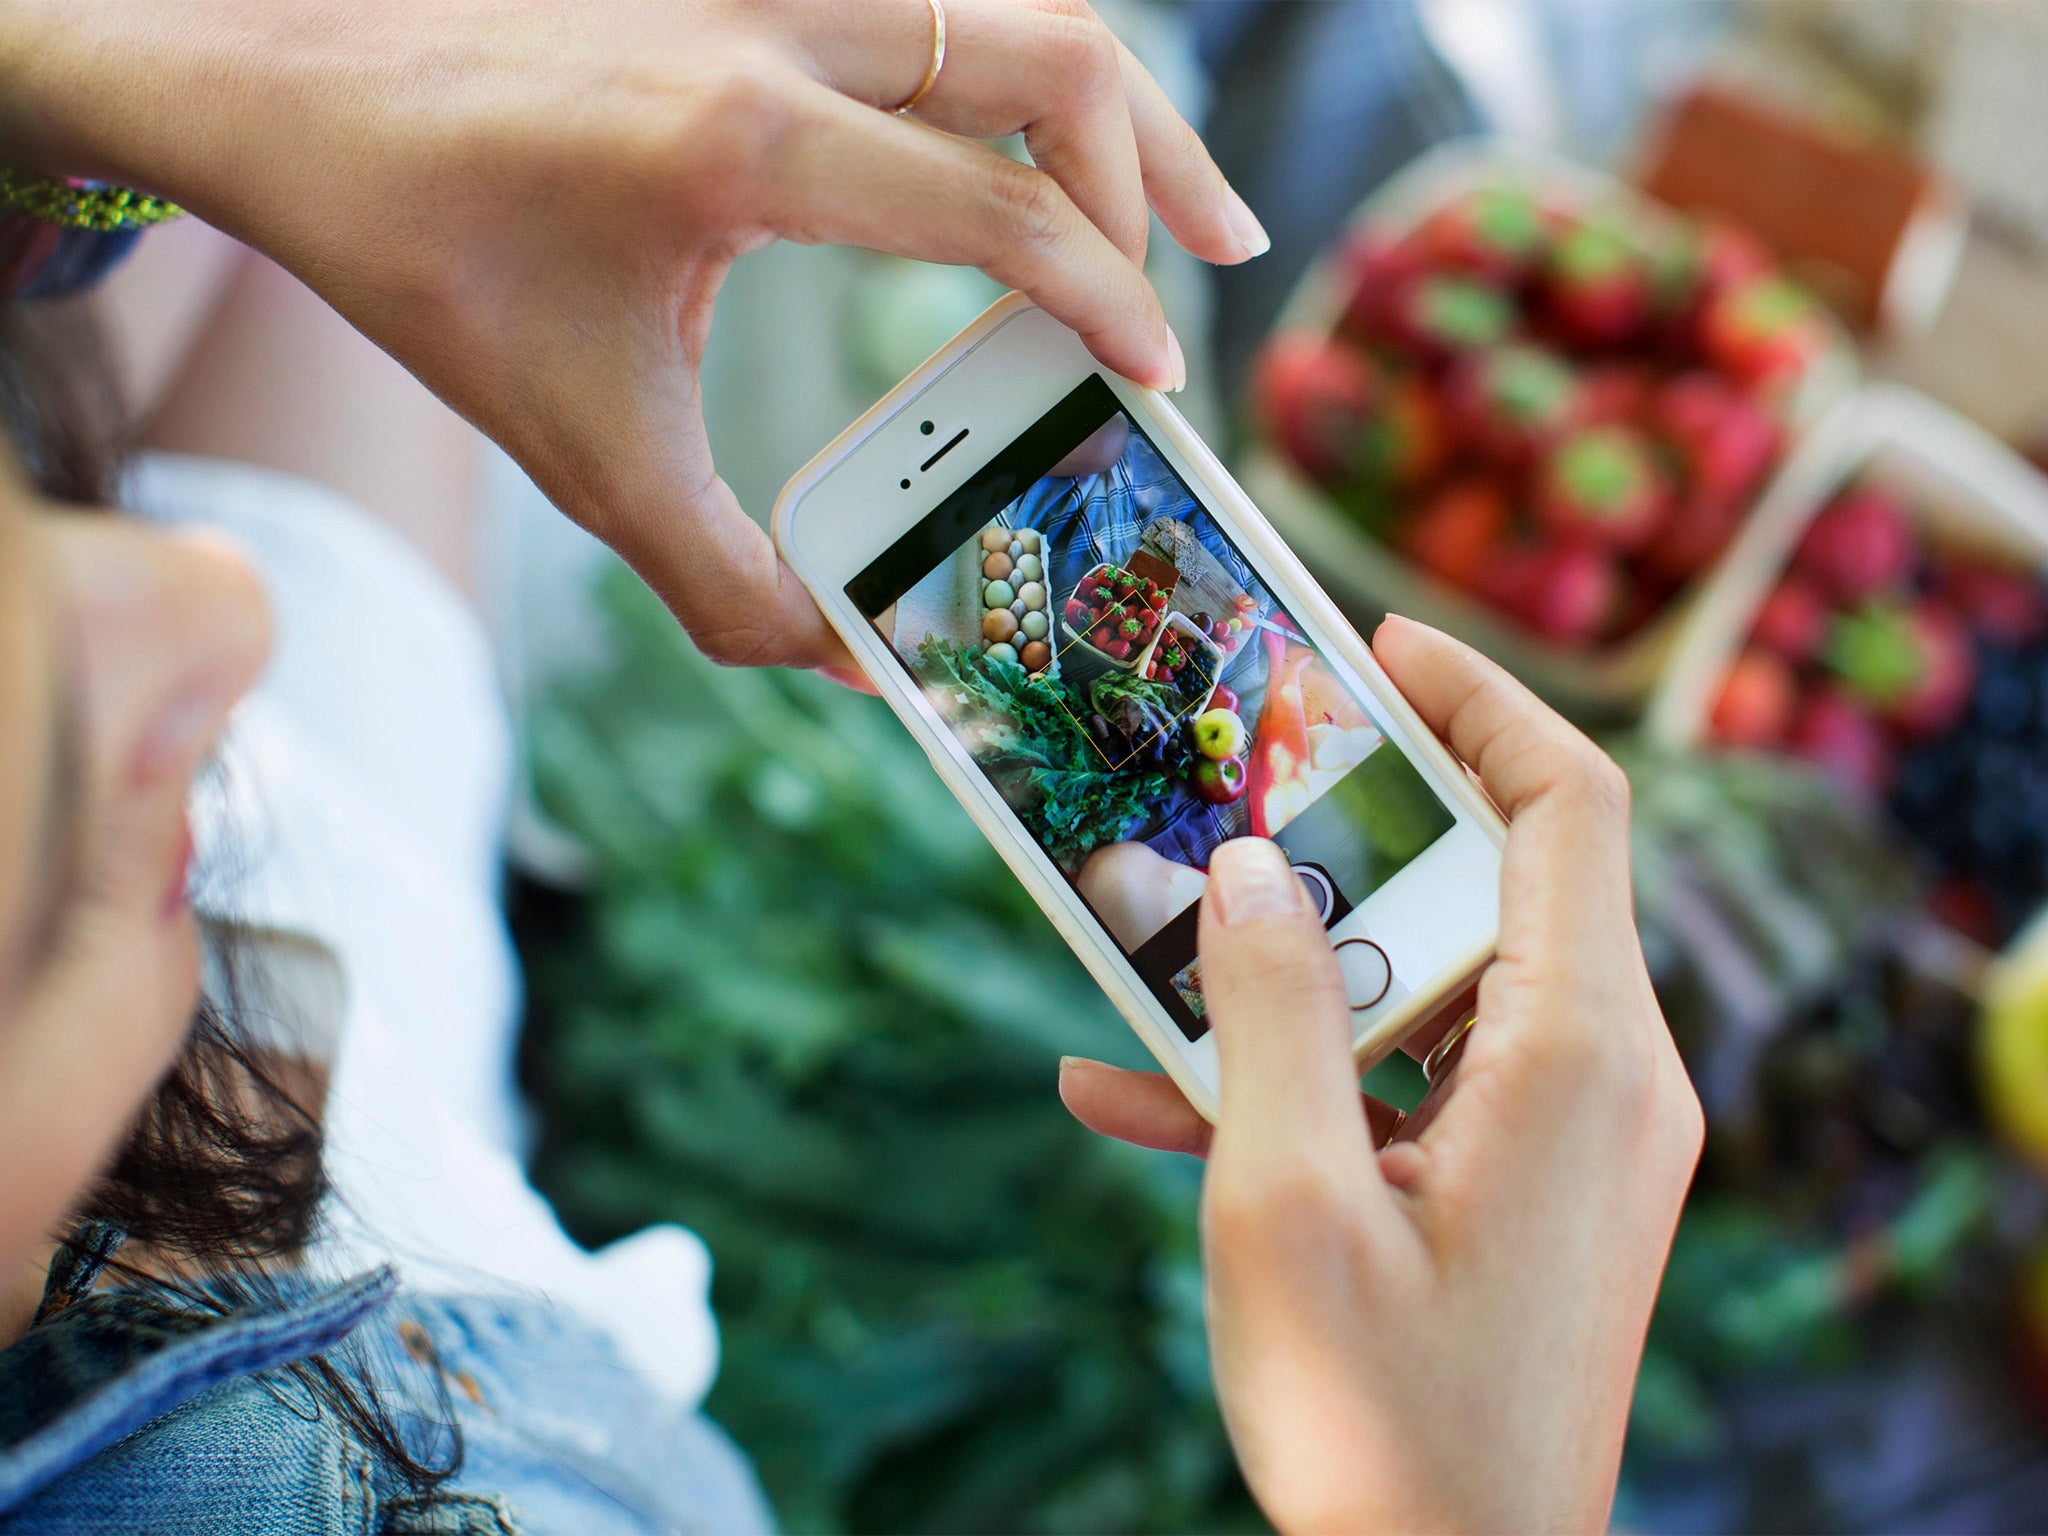 Fruit of the zoom: photographing your meal is the new way to prove you’re a ‘foodie’